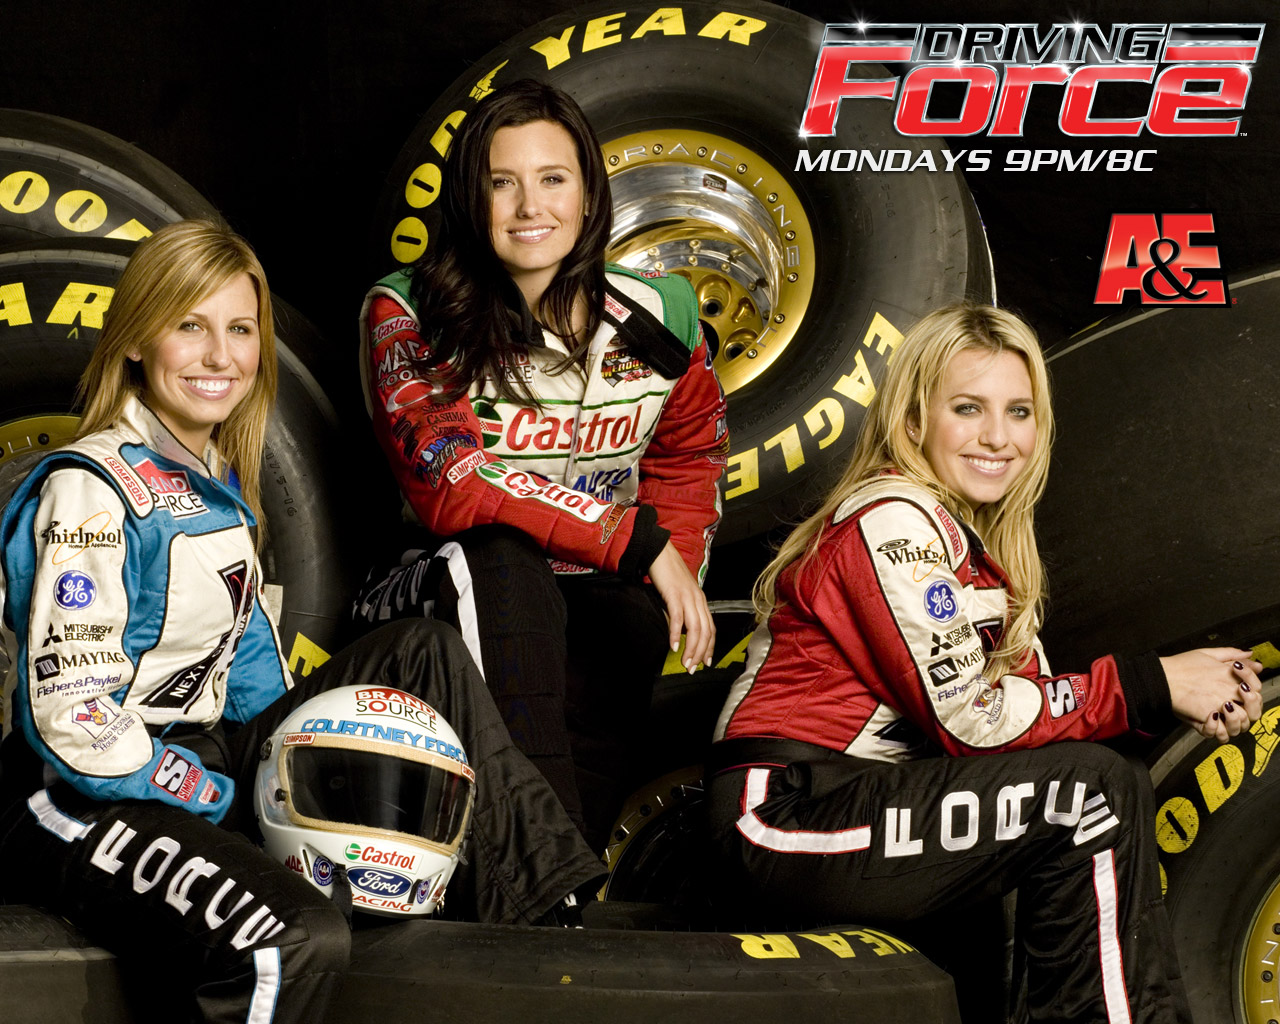 Driving Force Image Ladies Behind The HD Wallpaper